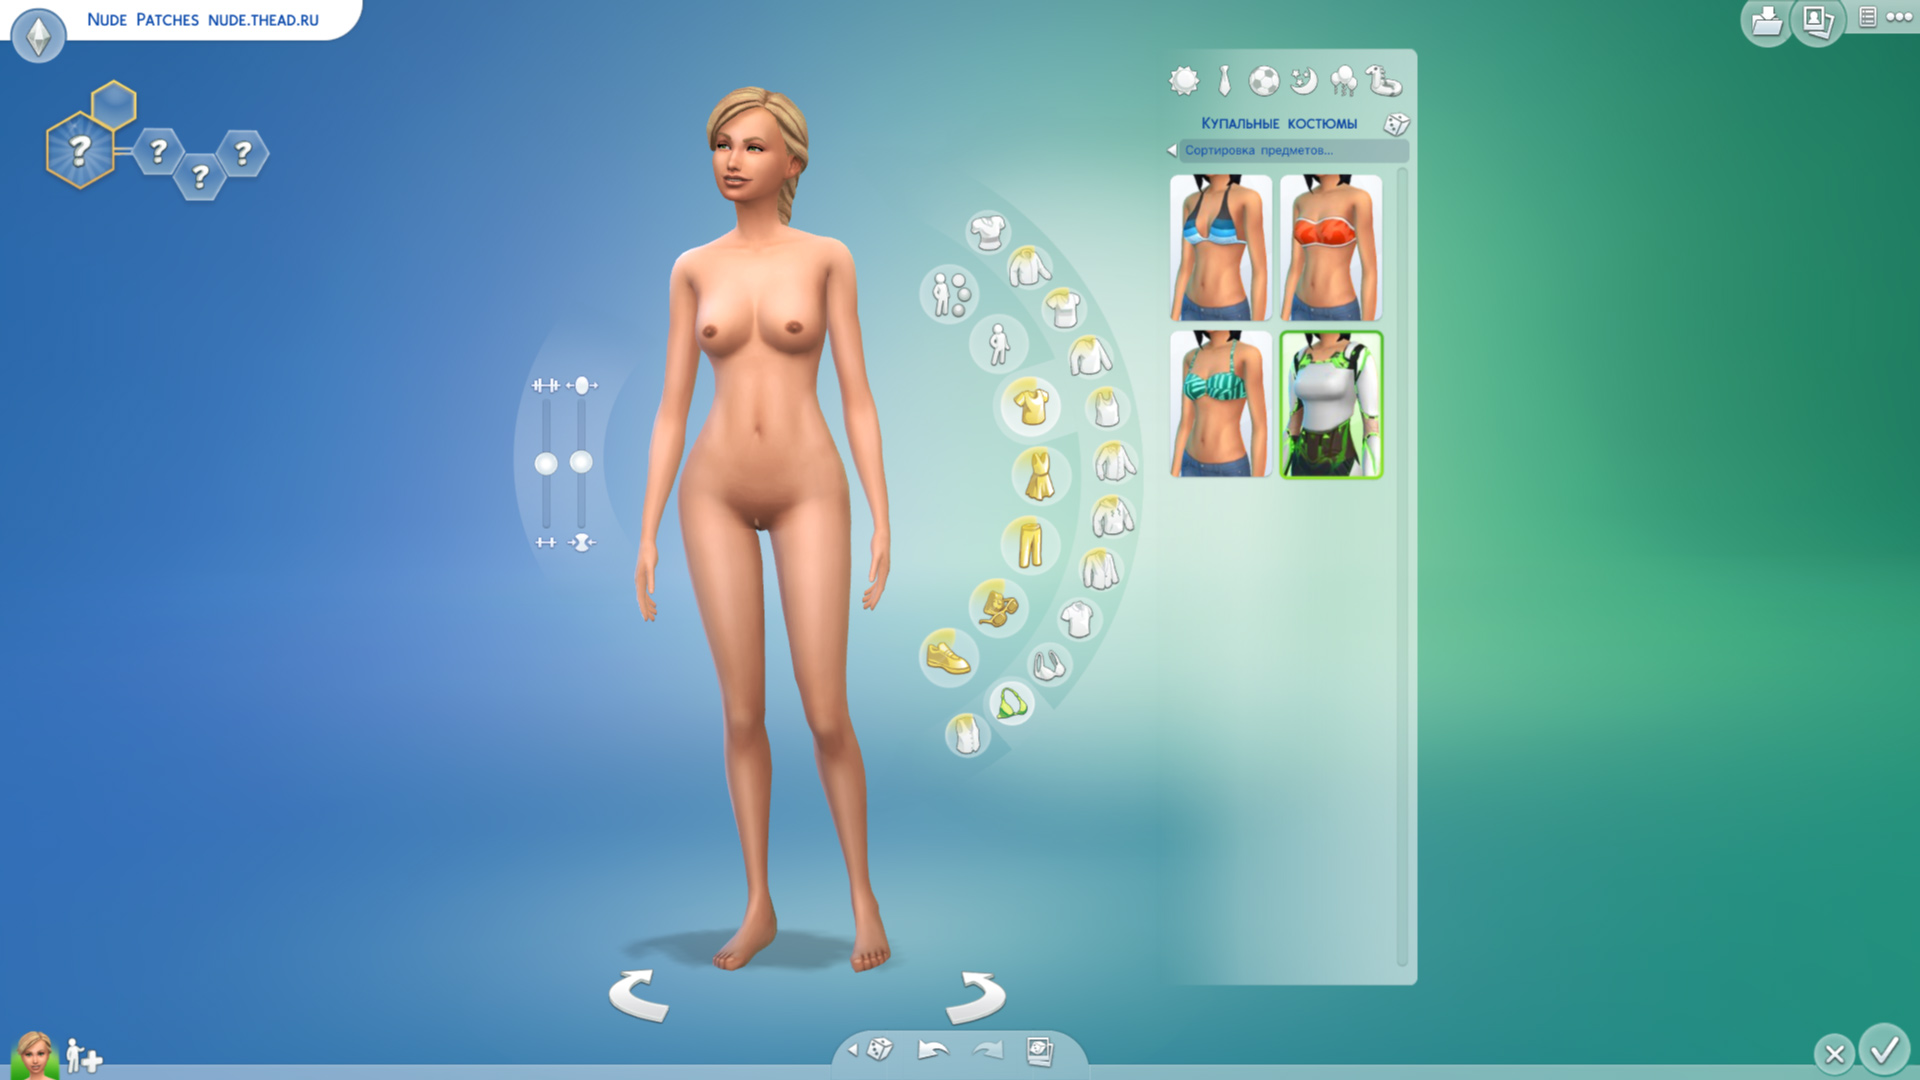 The sims 4 nude mod